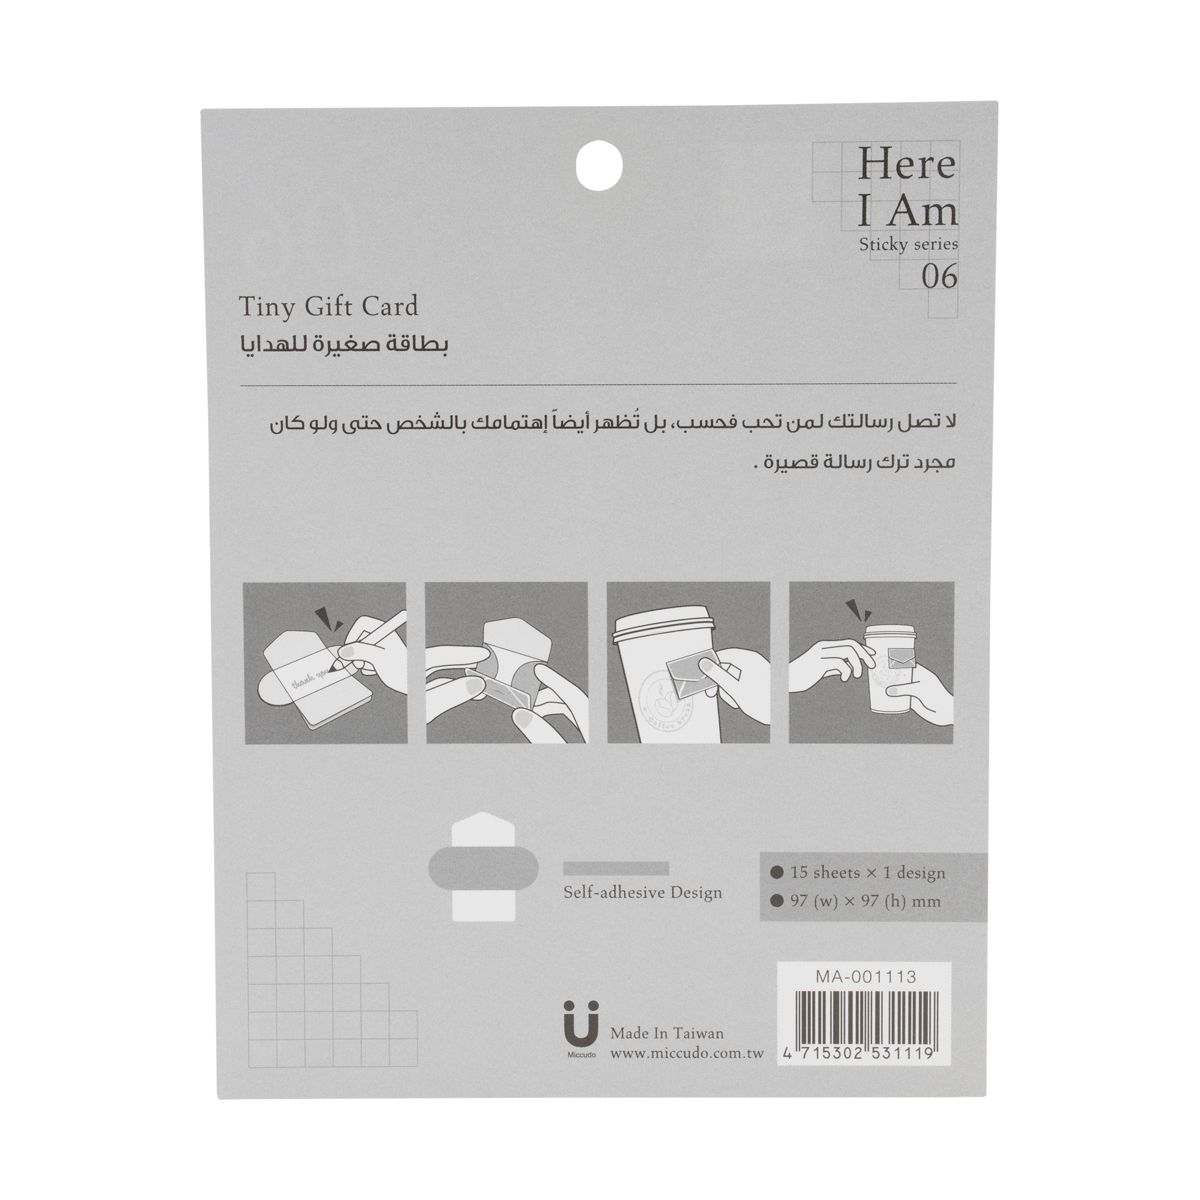 Here I Am Tiny Gift Card Sticky Series